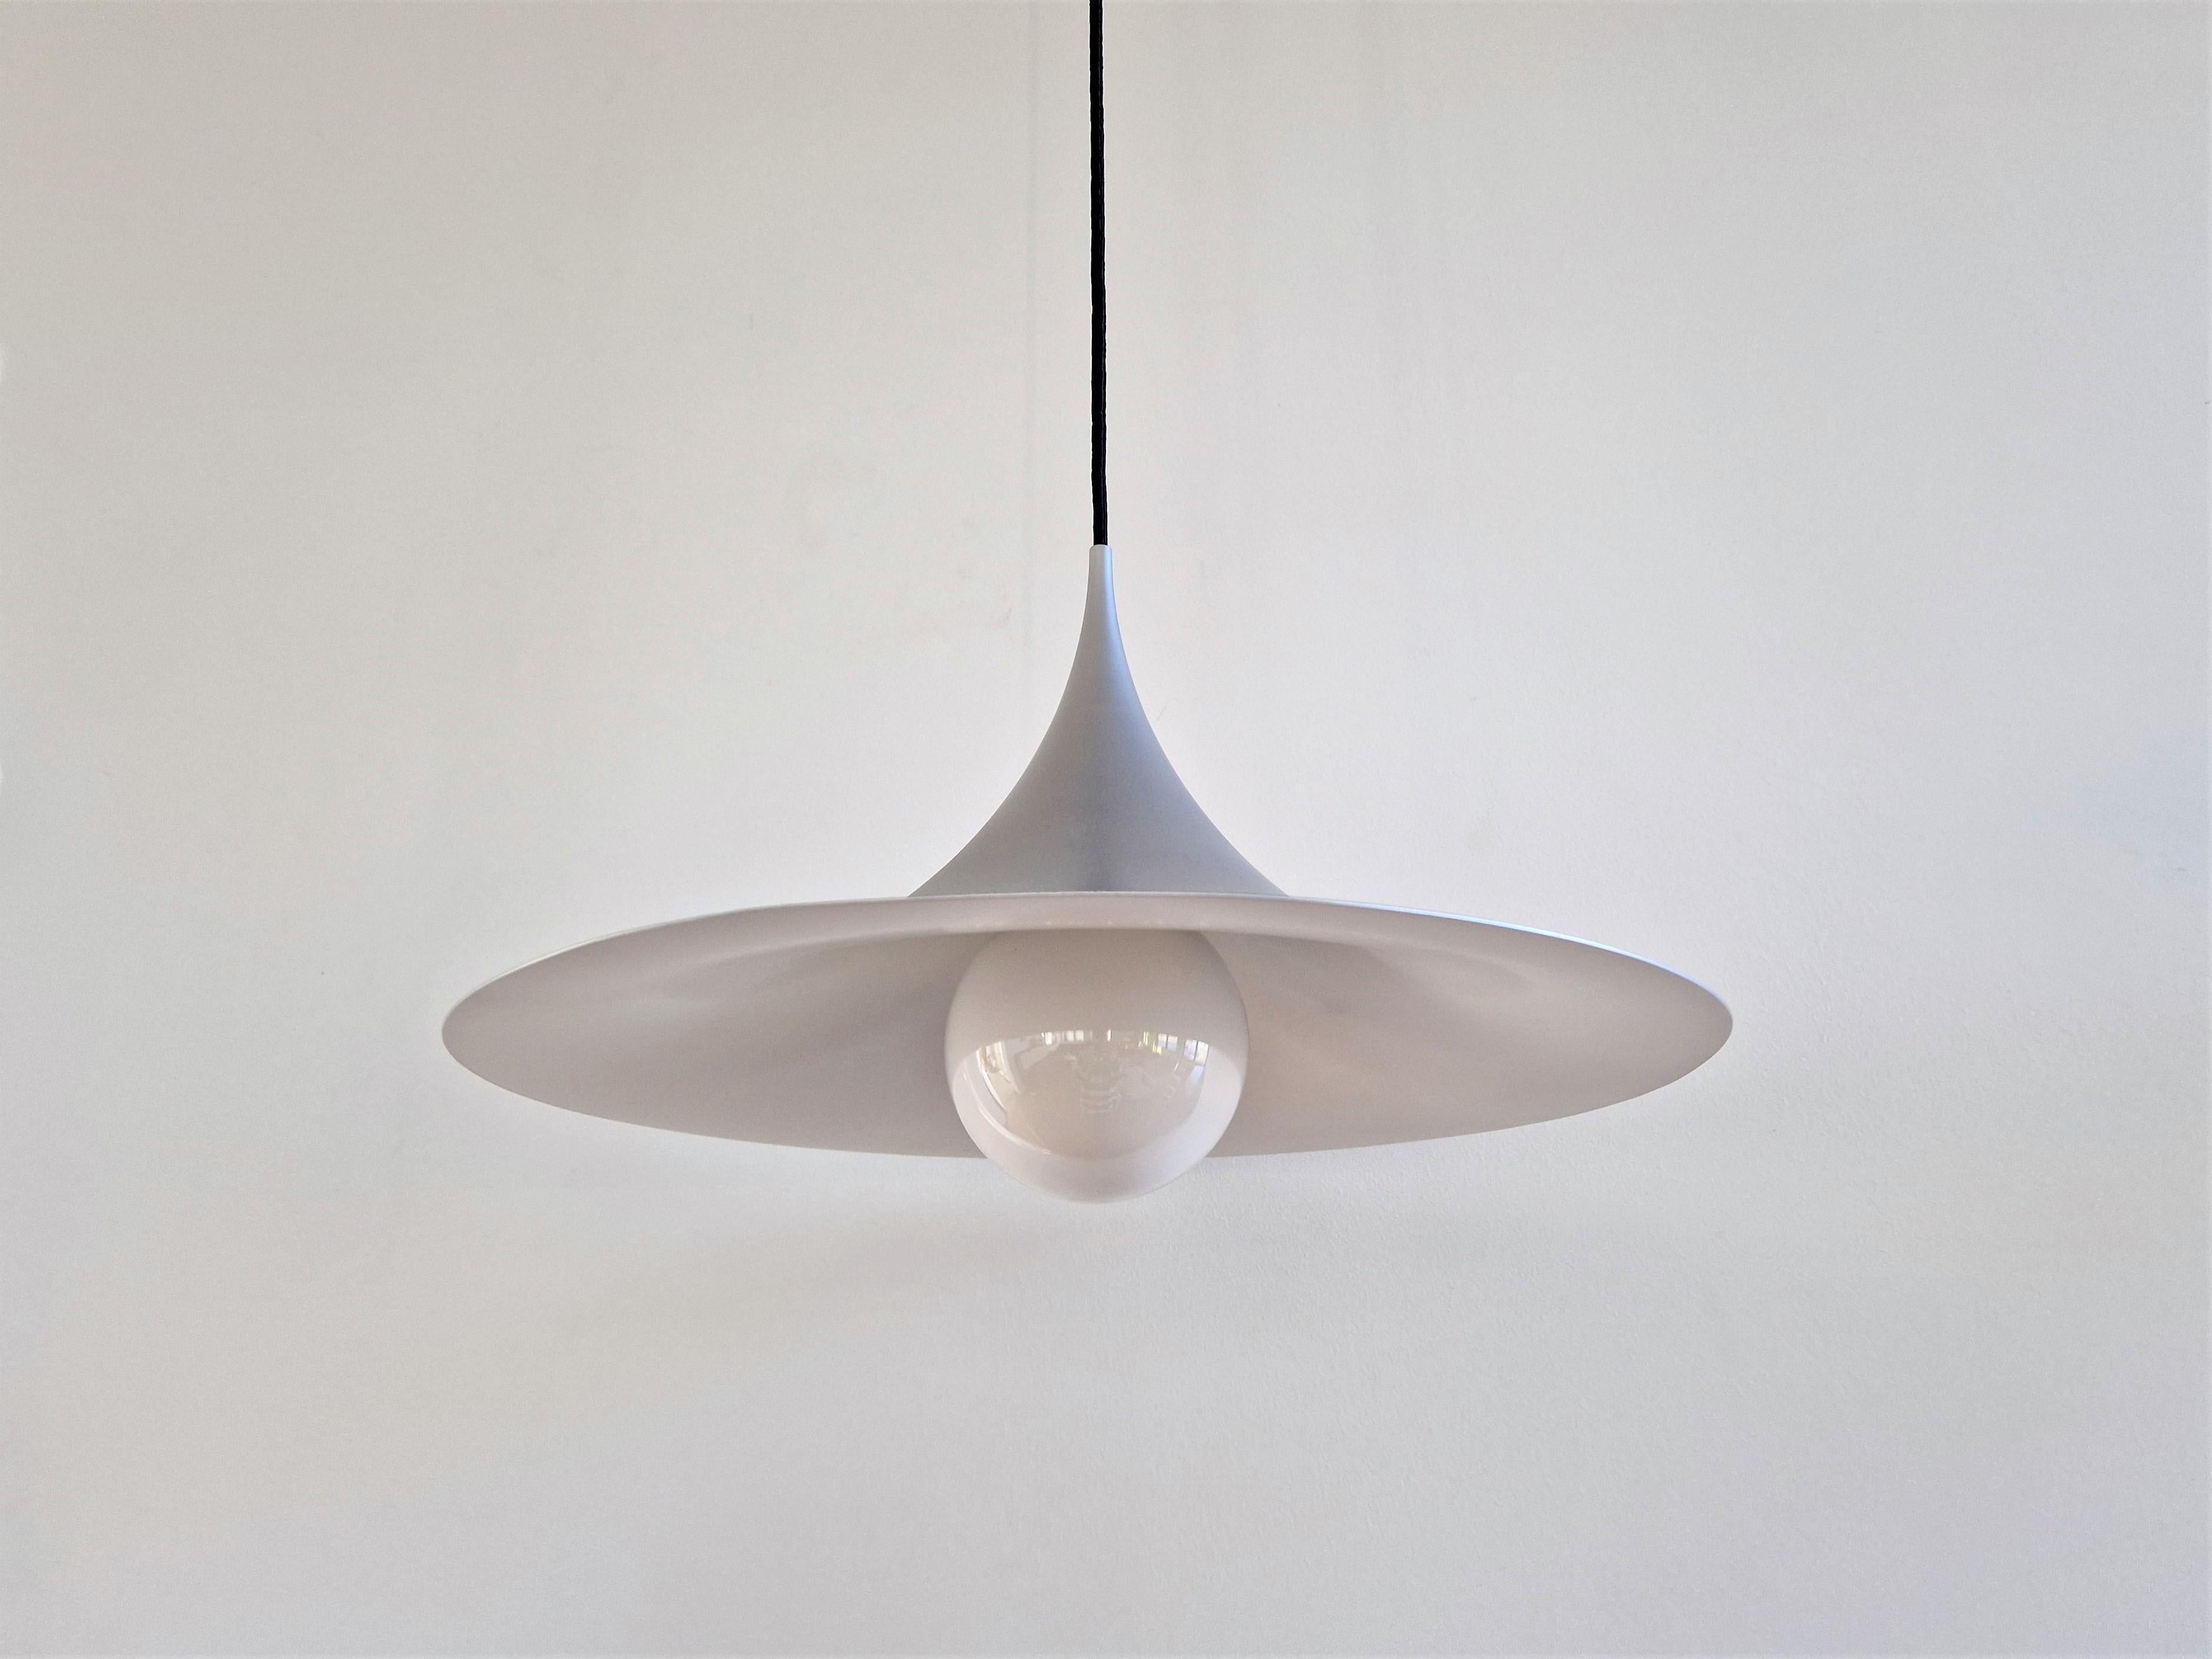 Mat Silver Colored Semi Pendant Lamp by Bonderup & Torsten Thorup for F&M In Good Condition For Sale In Steenwijk, NL